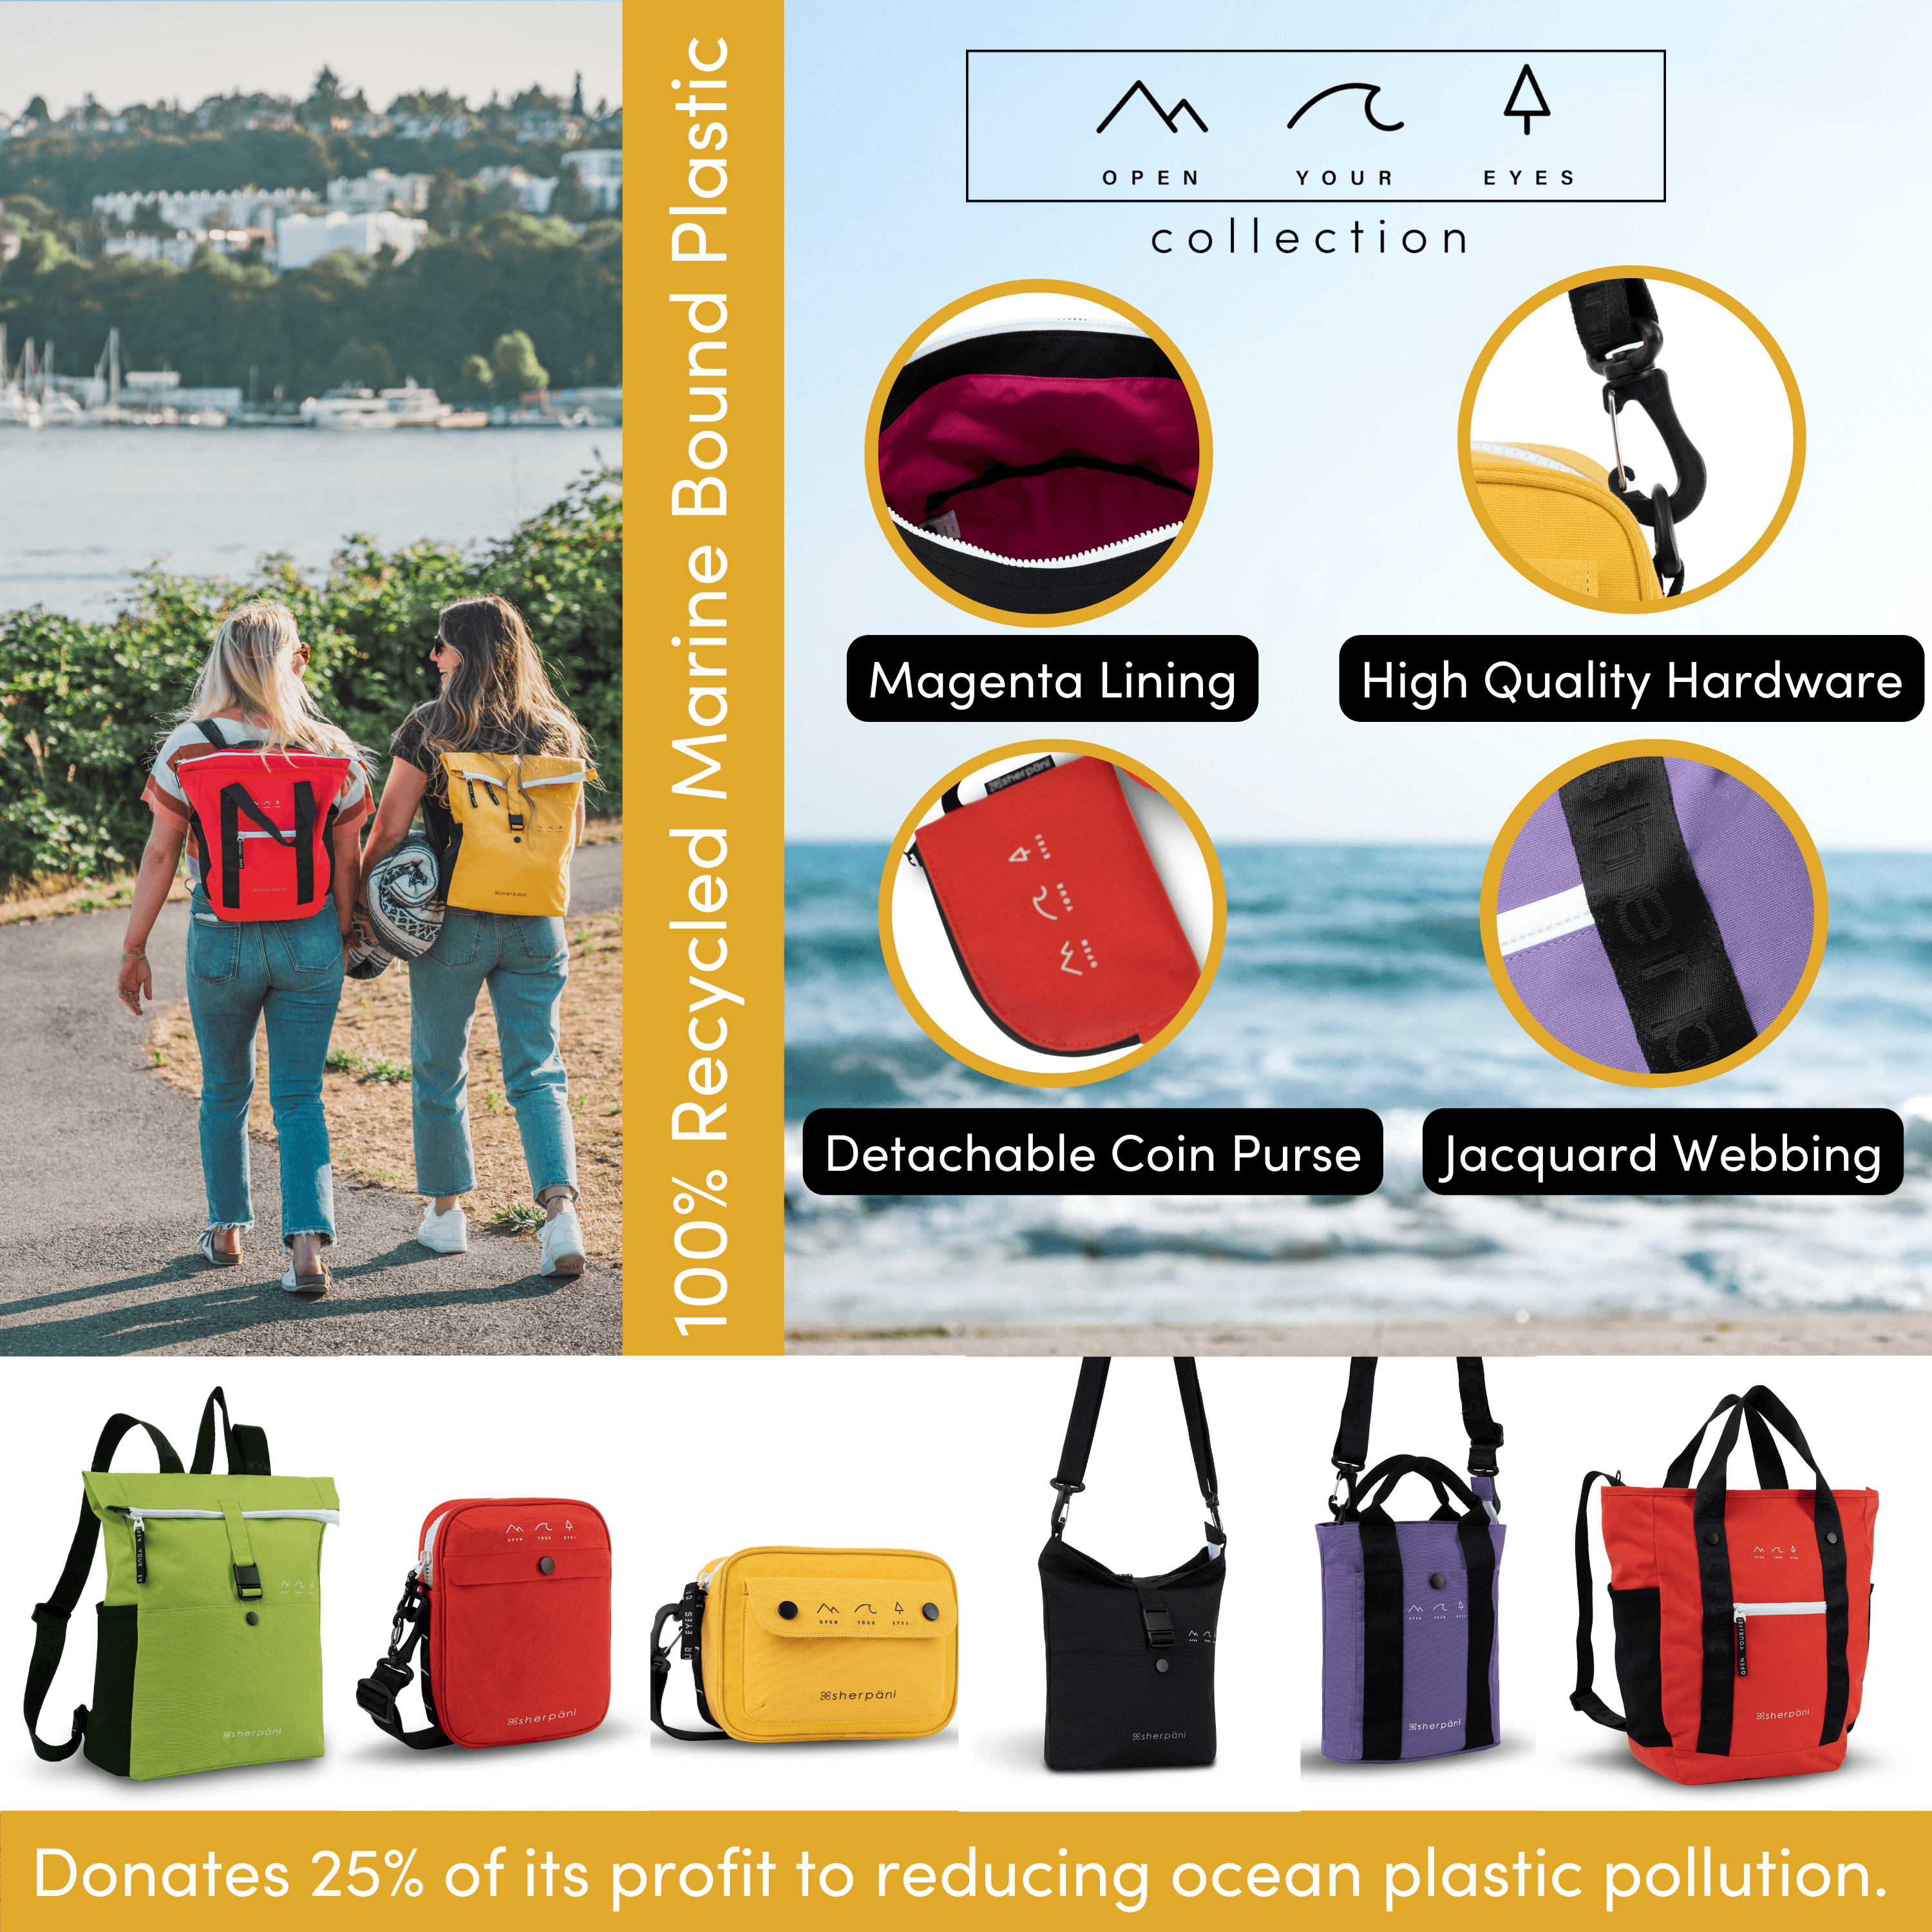 Graphic highlighting the Open Your Eyes Collection by Sherpani. There is a photo of two women walking outside wearing Sherpani bags, as well as a photo of all the bags in the collection. Text reads &quot;100% Recycled Marine Bound Plastic&quot; and &quot;Donates 25% of its profit to reducing ocean plastic pollution. The following features of the collection are highlighted: Magenta Lining, High Quality Hardware, Detachable Coin Purse, Jacquard Webbing.